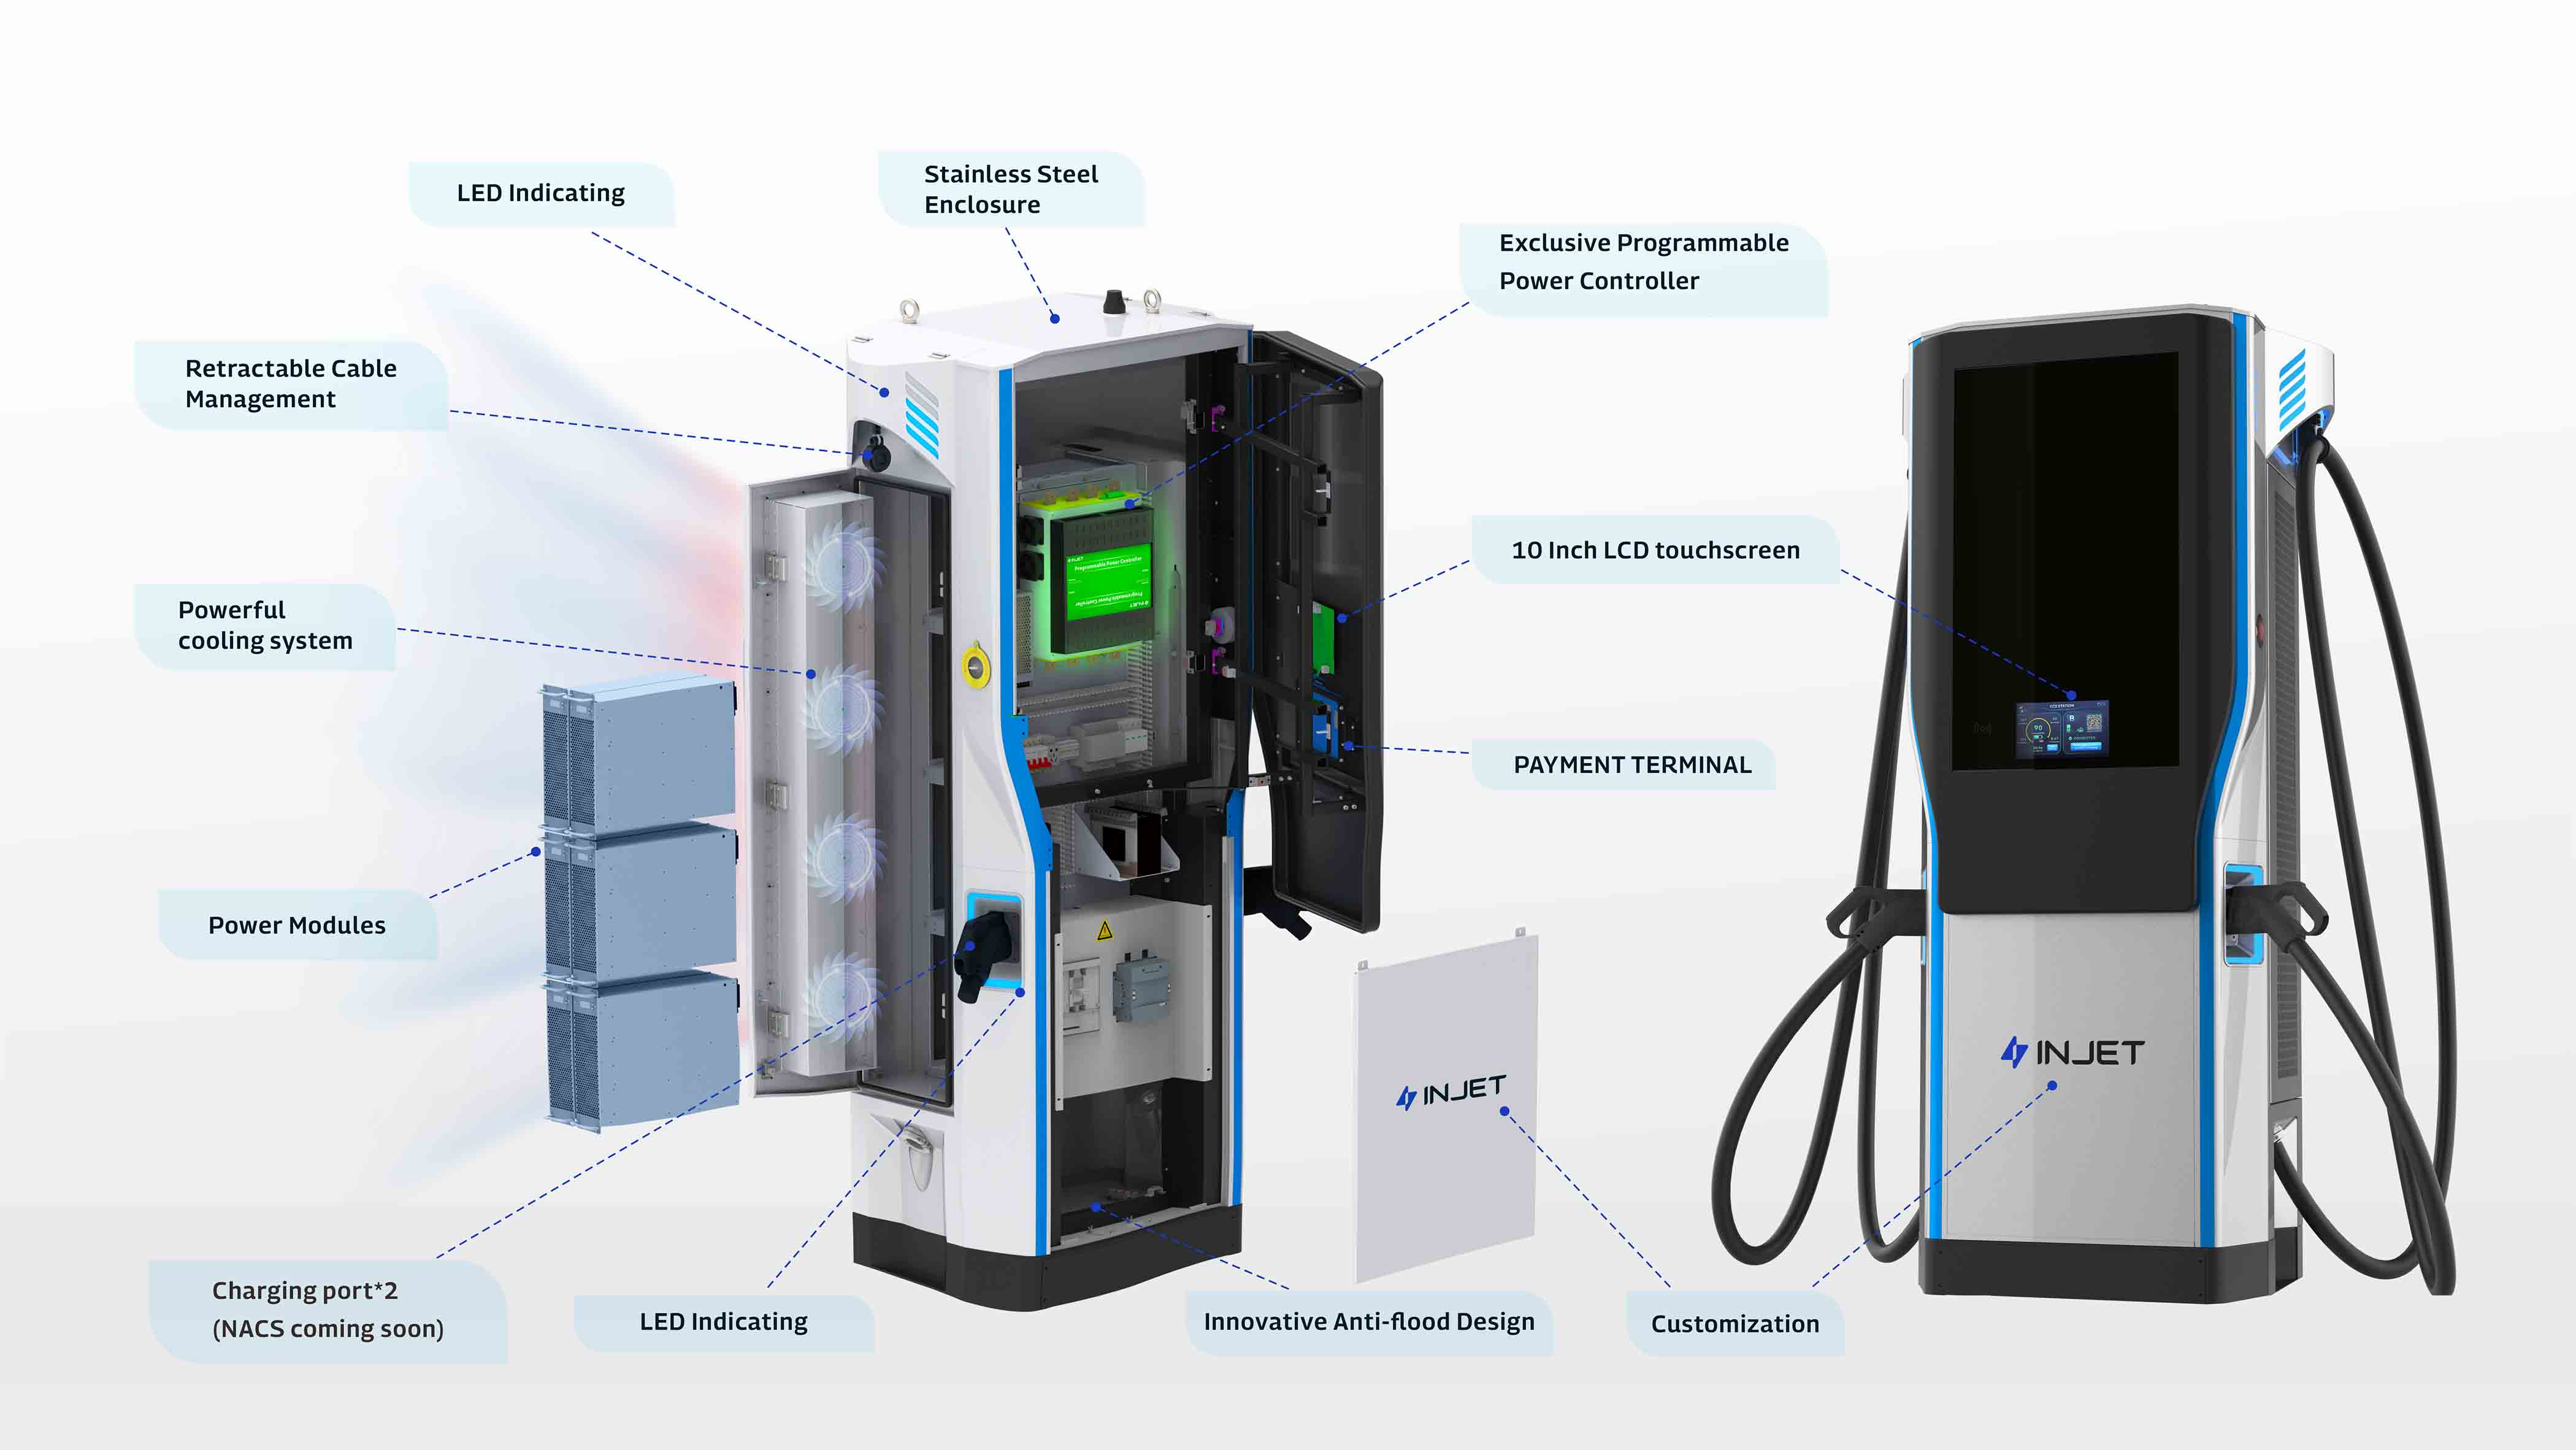 Understanding the Differences Between INJET Integrated DC Charging Stations and Traditional DC Charging Stations